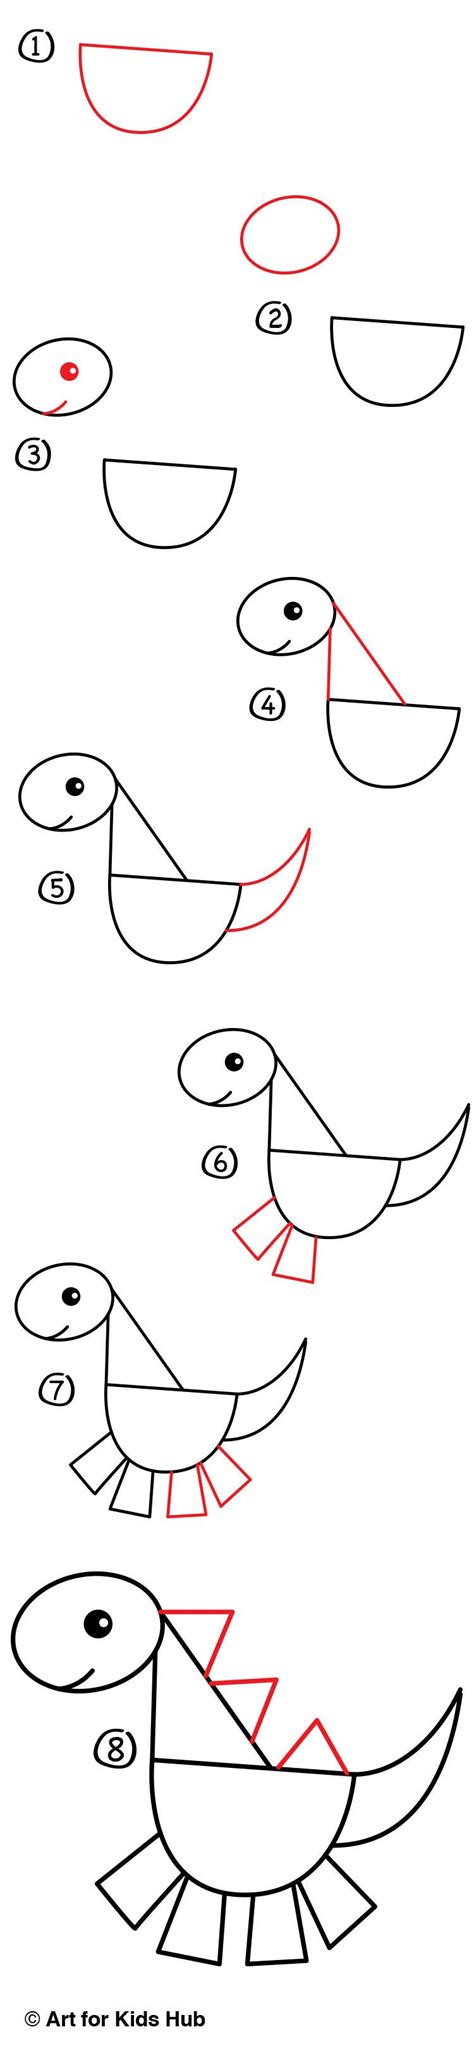 How To Draw A Cartoon Dinosaur Step By Step At Drawing Tutorials